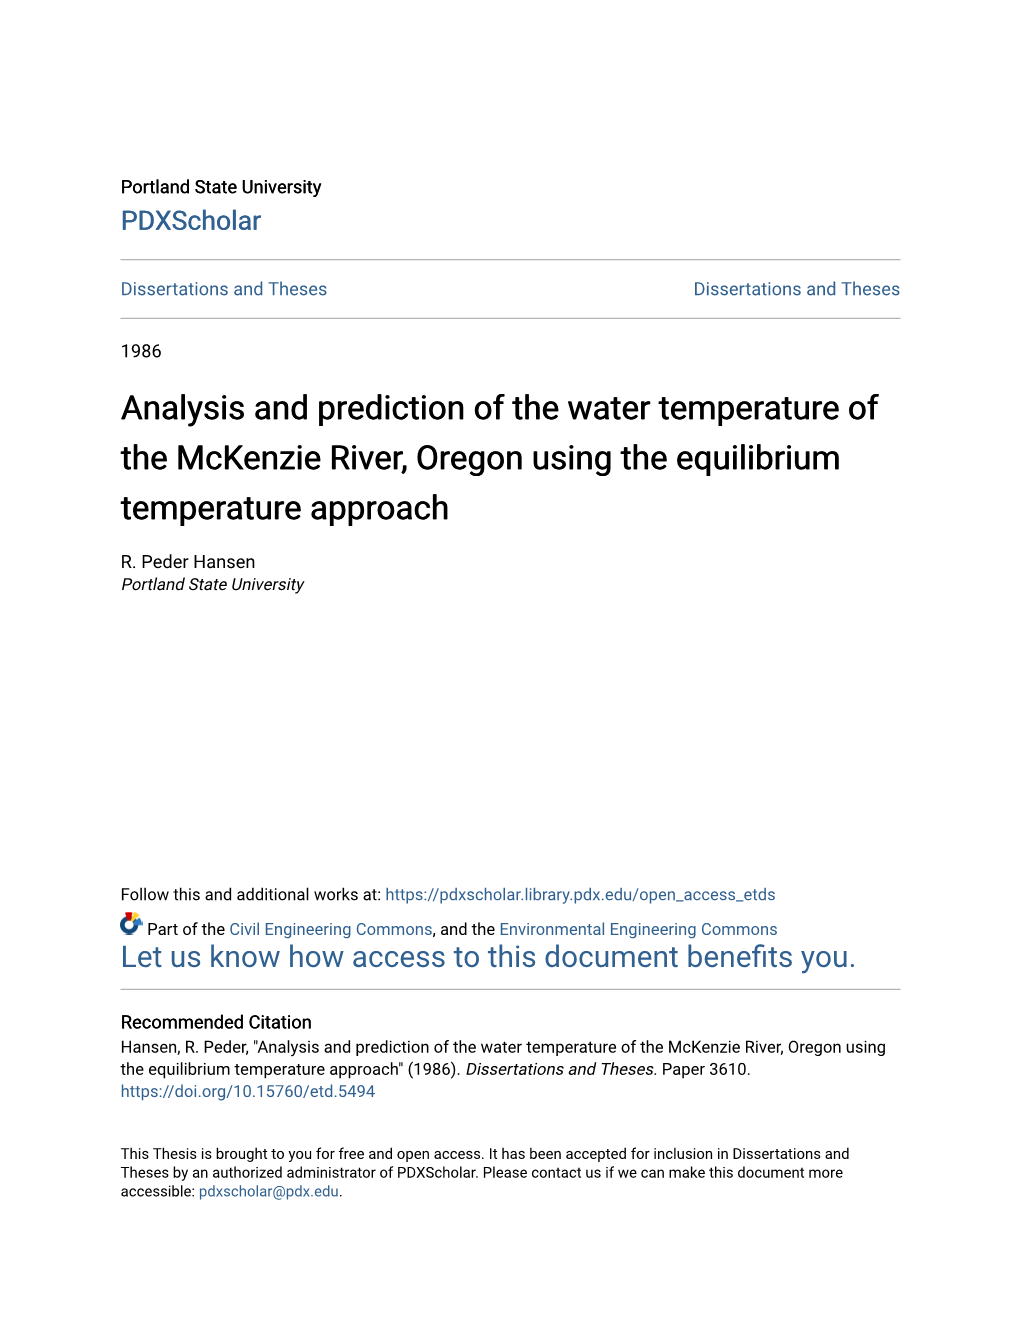 Analysis and Prediction of the Water Temperature of the Mckenzie River, Oregon Using the Equilibrium Temperature Approach